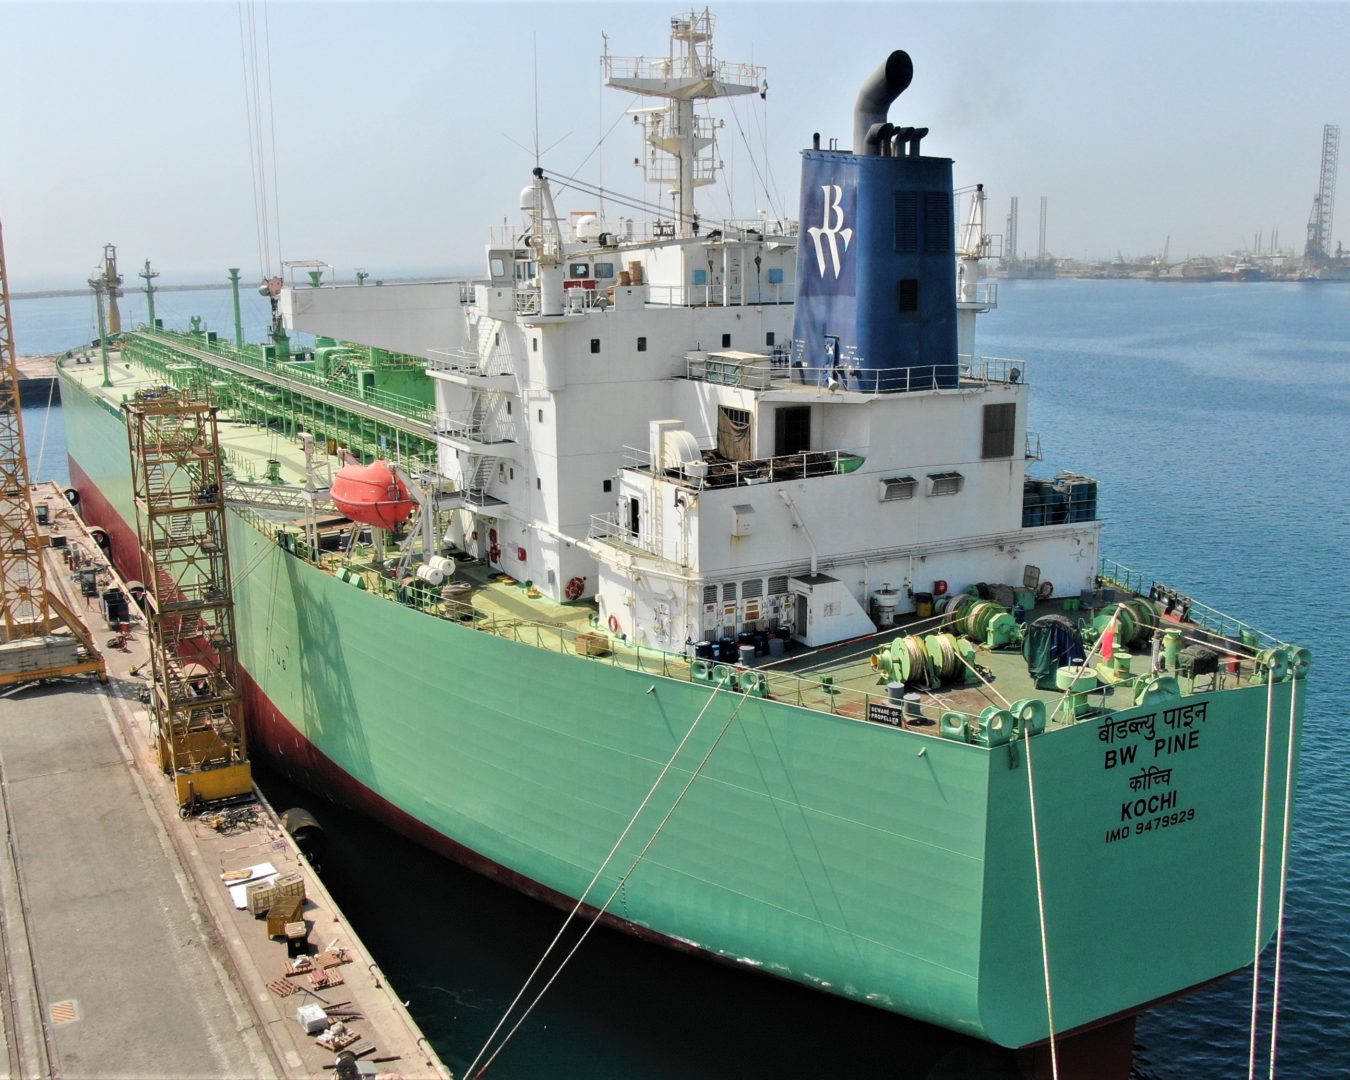 BW Pine, a Very Large Gas Carrier that is part of BW LPG India's Fleet